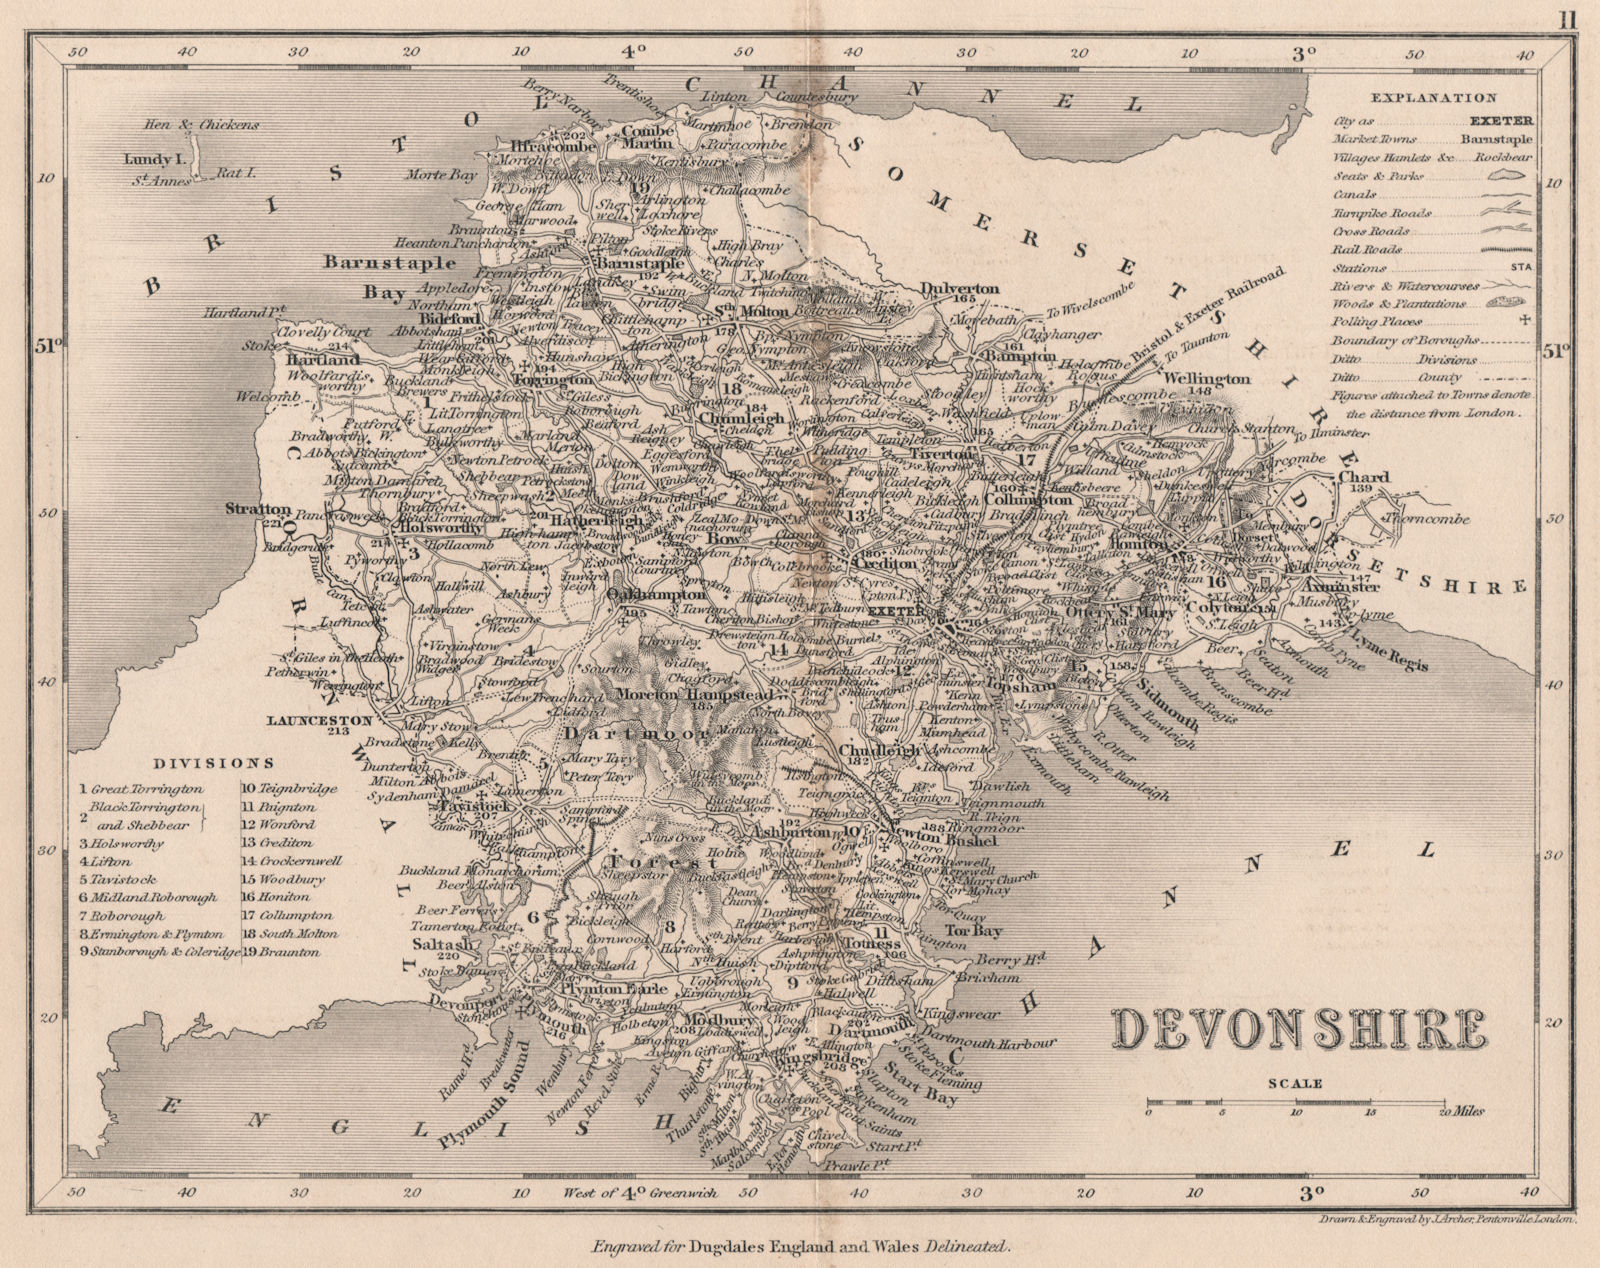 DEVONSHIRE county map by DUGDALE/ARCHER. Dartmoor. Seats polling places 1845